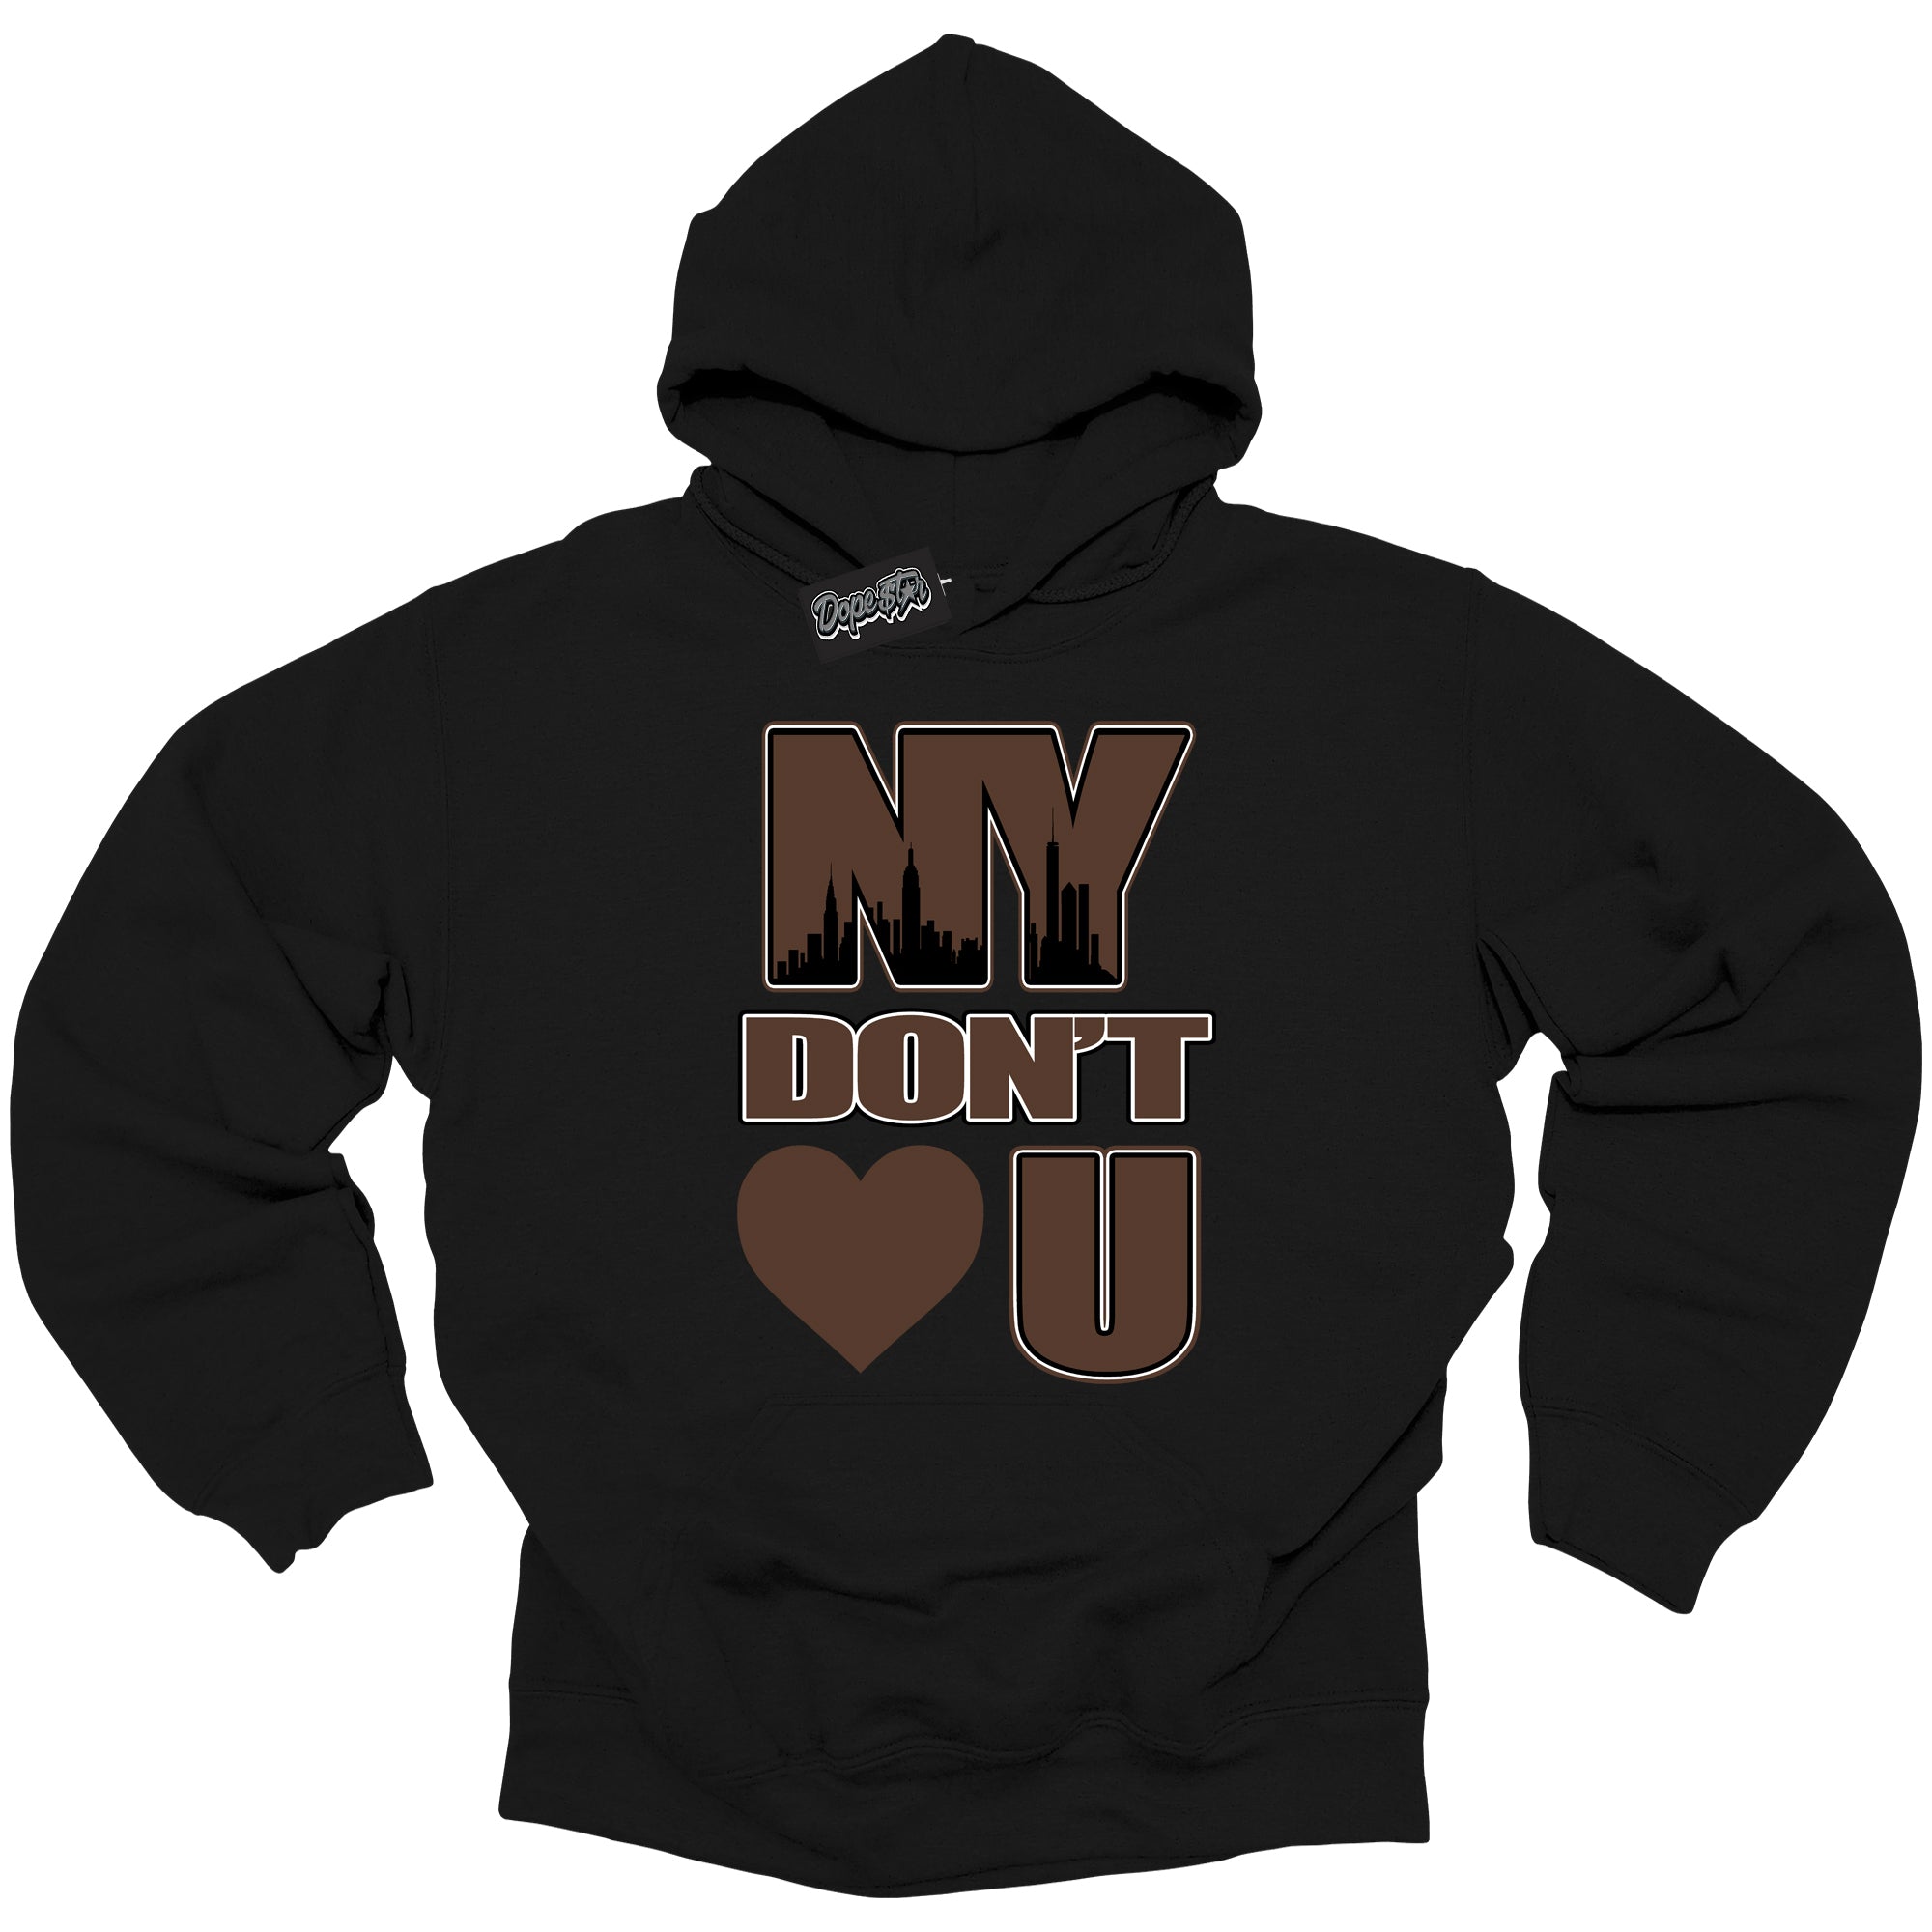 Cool Black Graphic DopeStar Hoodie with “ NY Don't Love You “ print, that perfectly matches Palomino 1s sneakers